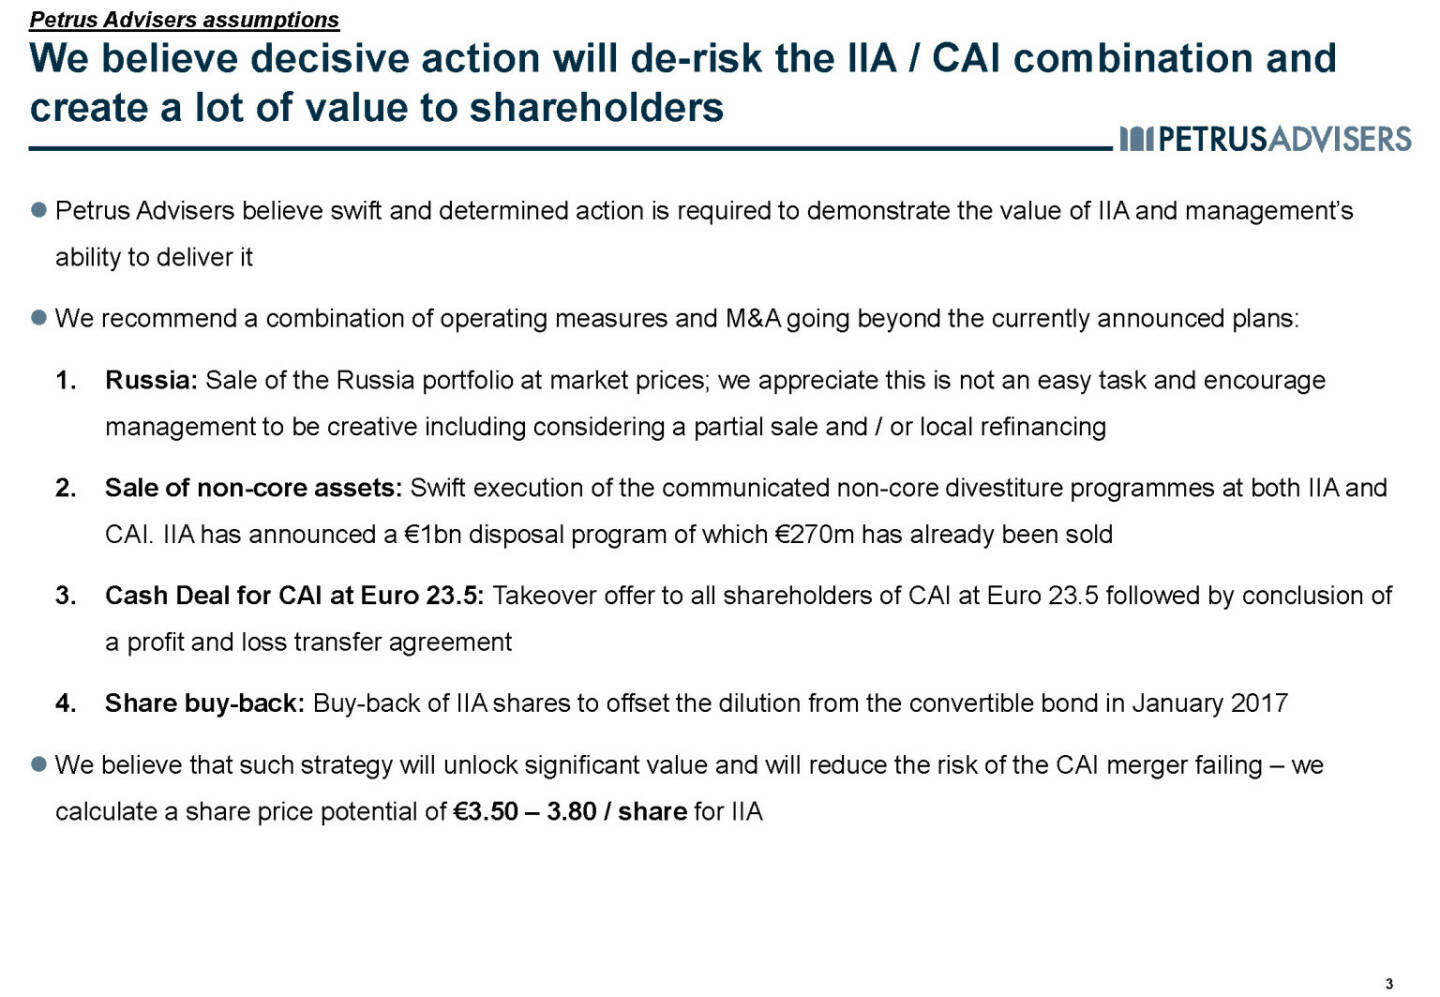 We believe decisive action will de-risk the IIA / CAI combination and create a lot of value to shareholders
 - Petrus Advisers